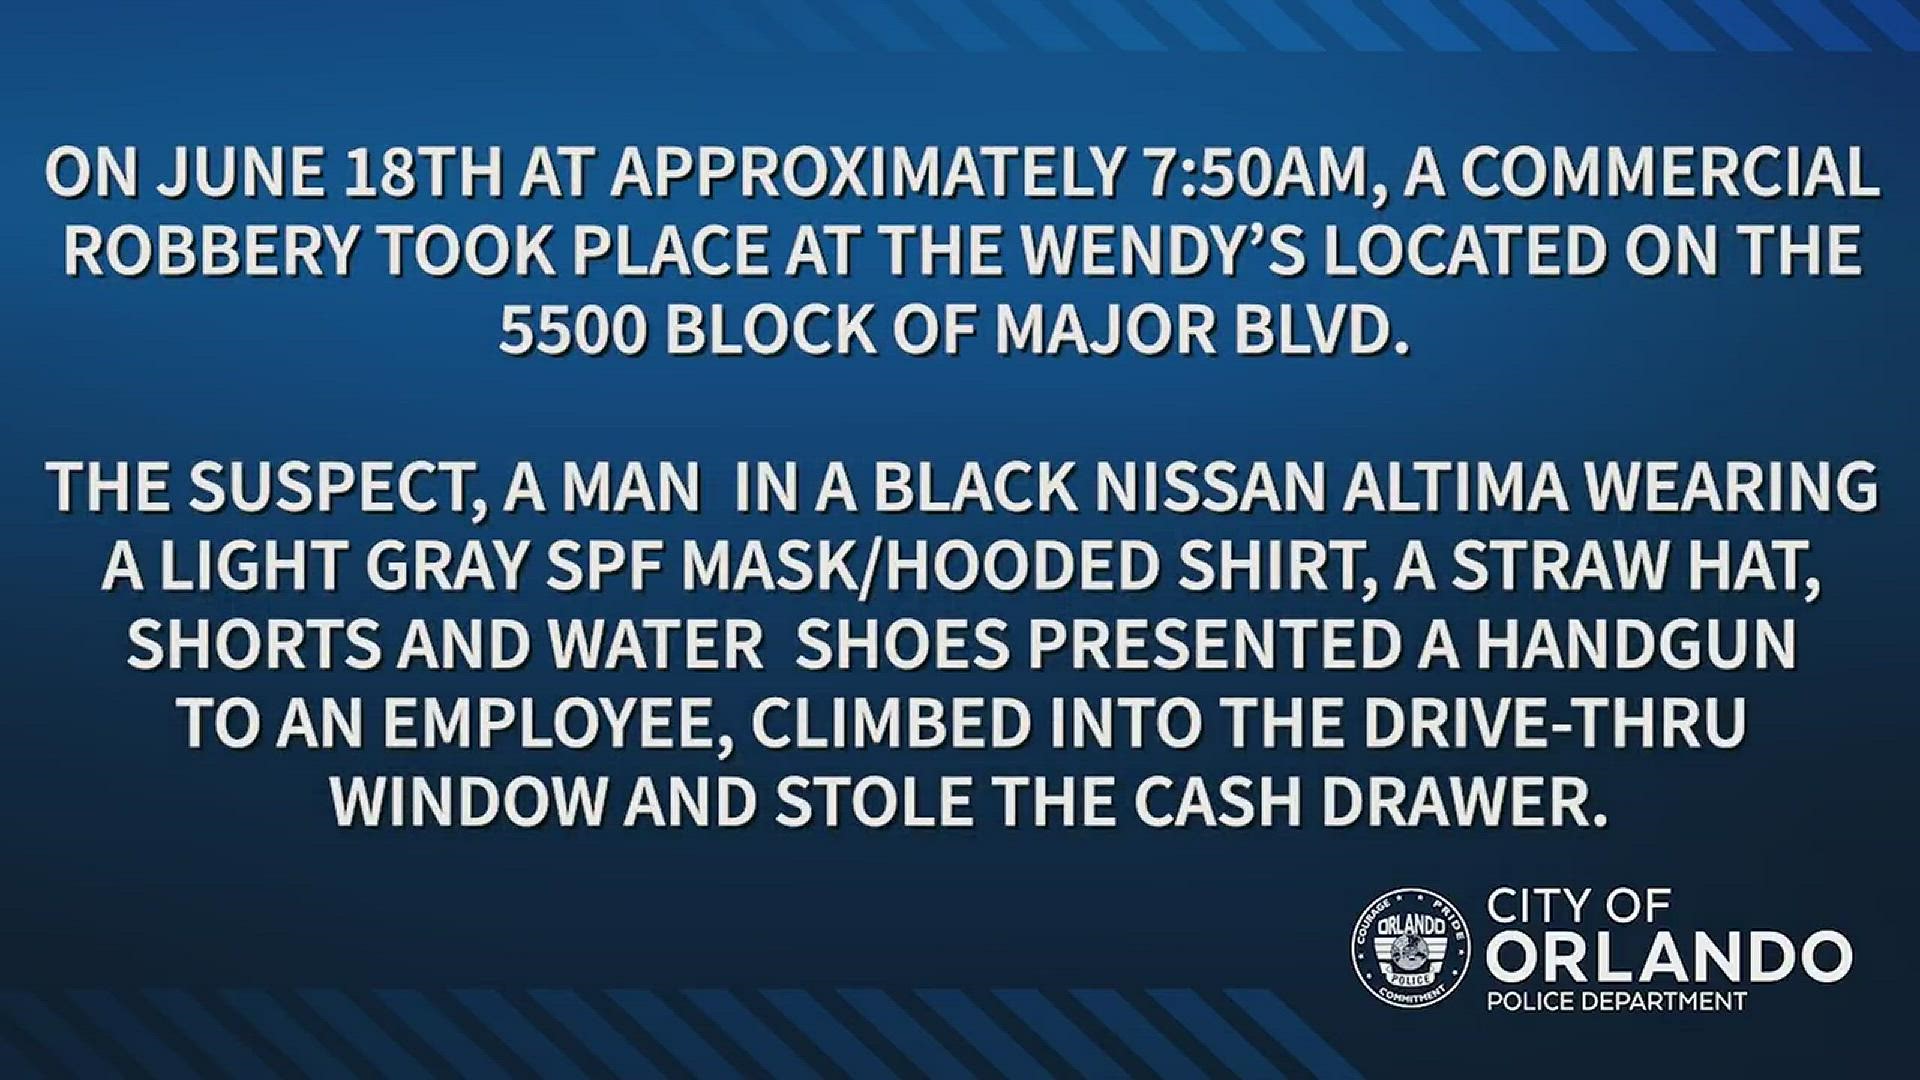 Orlando police are looking for a man who climbed into a Wendy's window and stole money from the cash register.